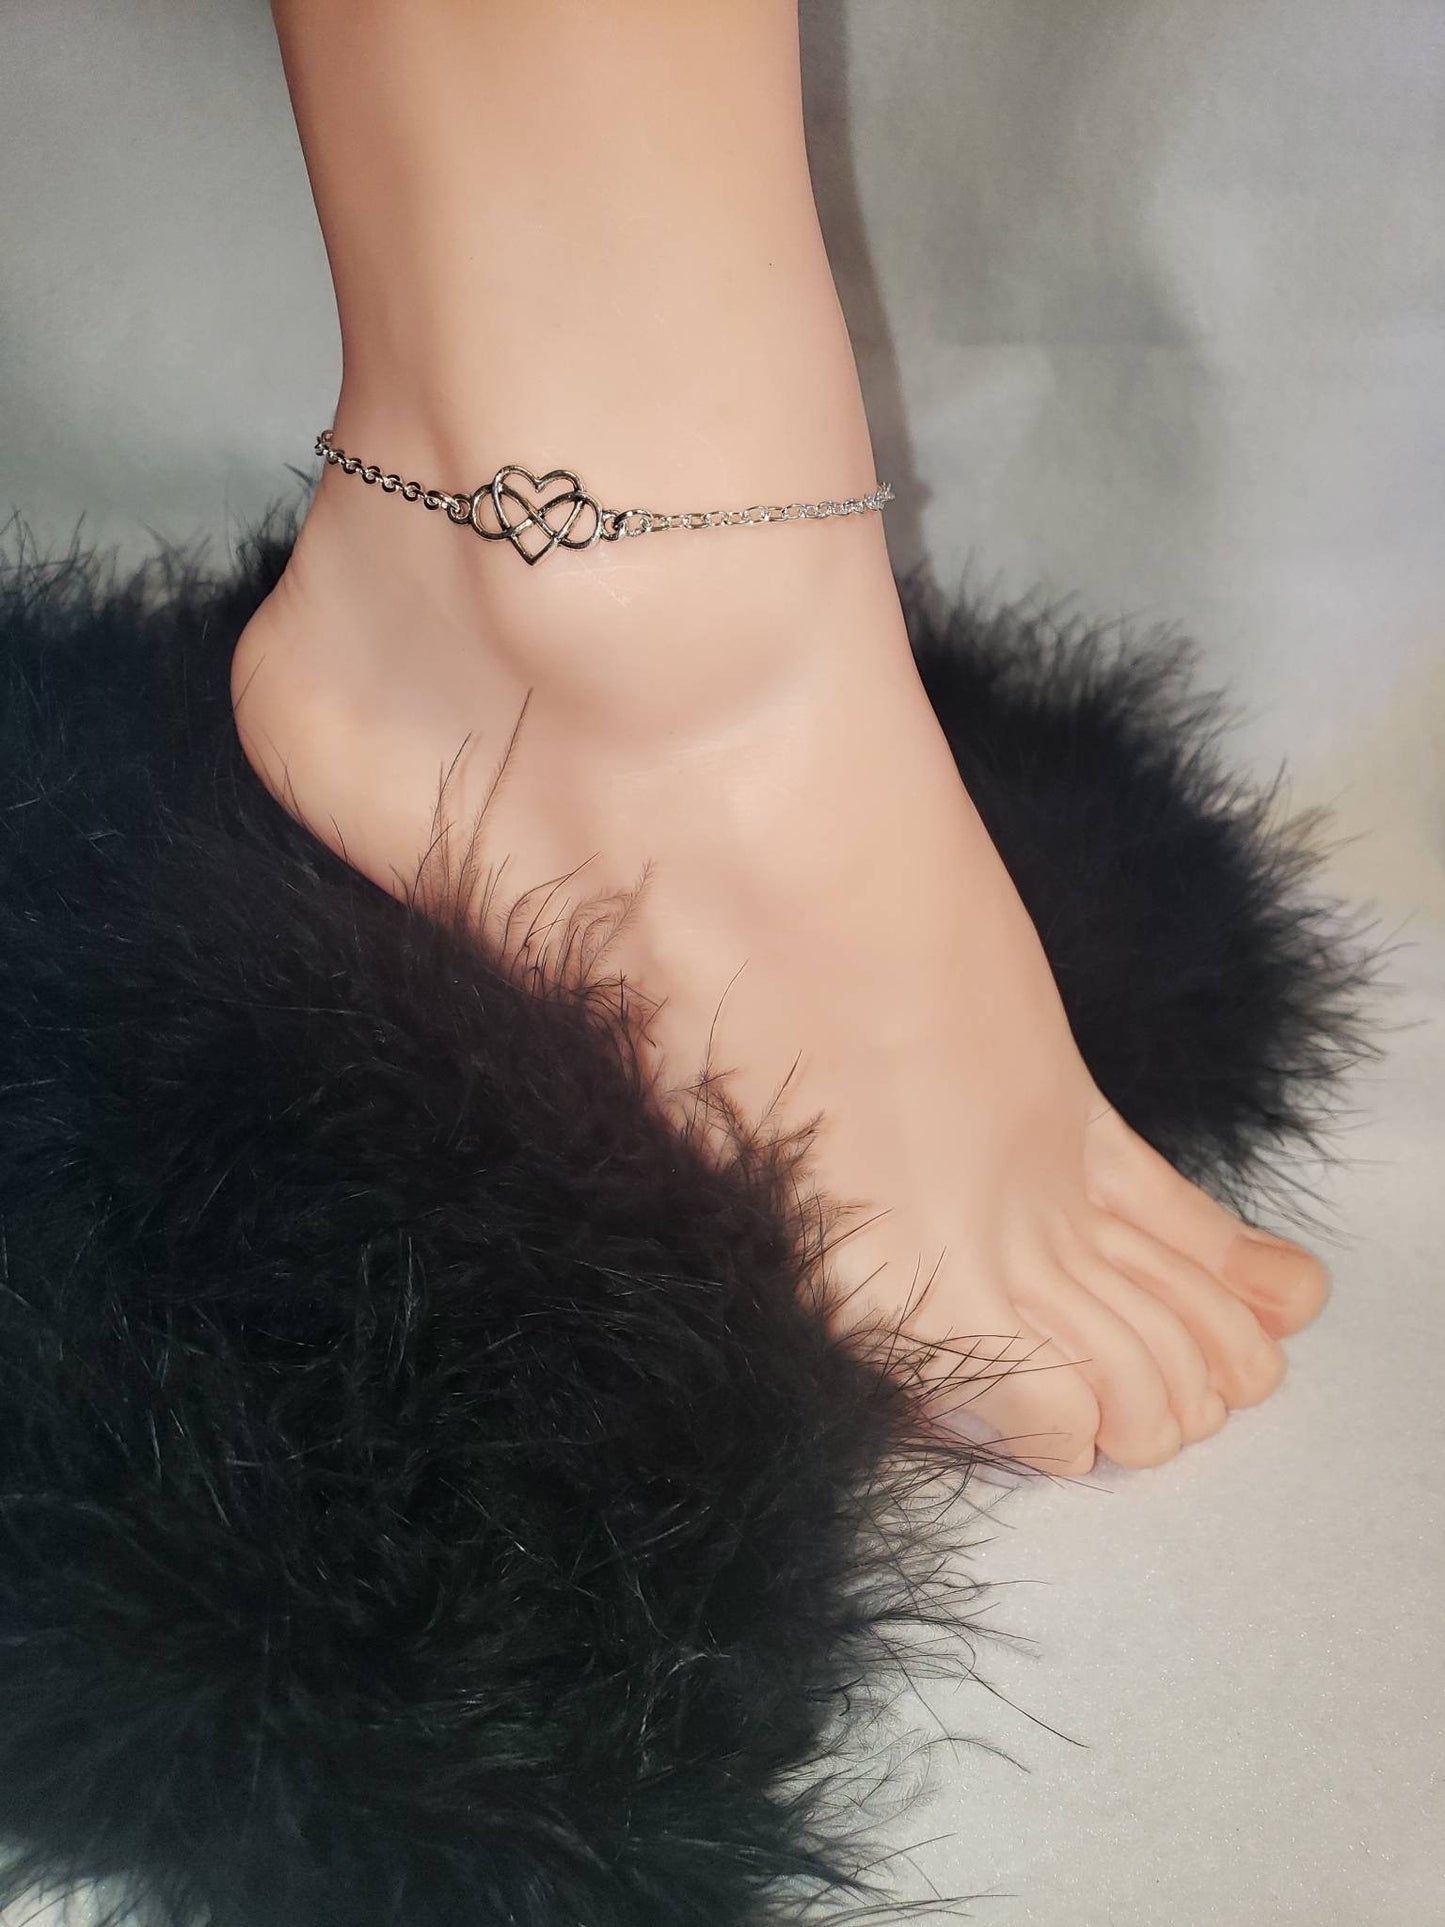 HotWife Anklet, Infinity Heart Anklet, Polyamory Anklet, Everyday Anklet, Kinky Anklet, Sexy Anklets, Swinger Jewelry